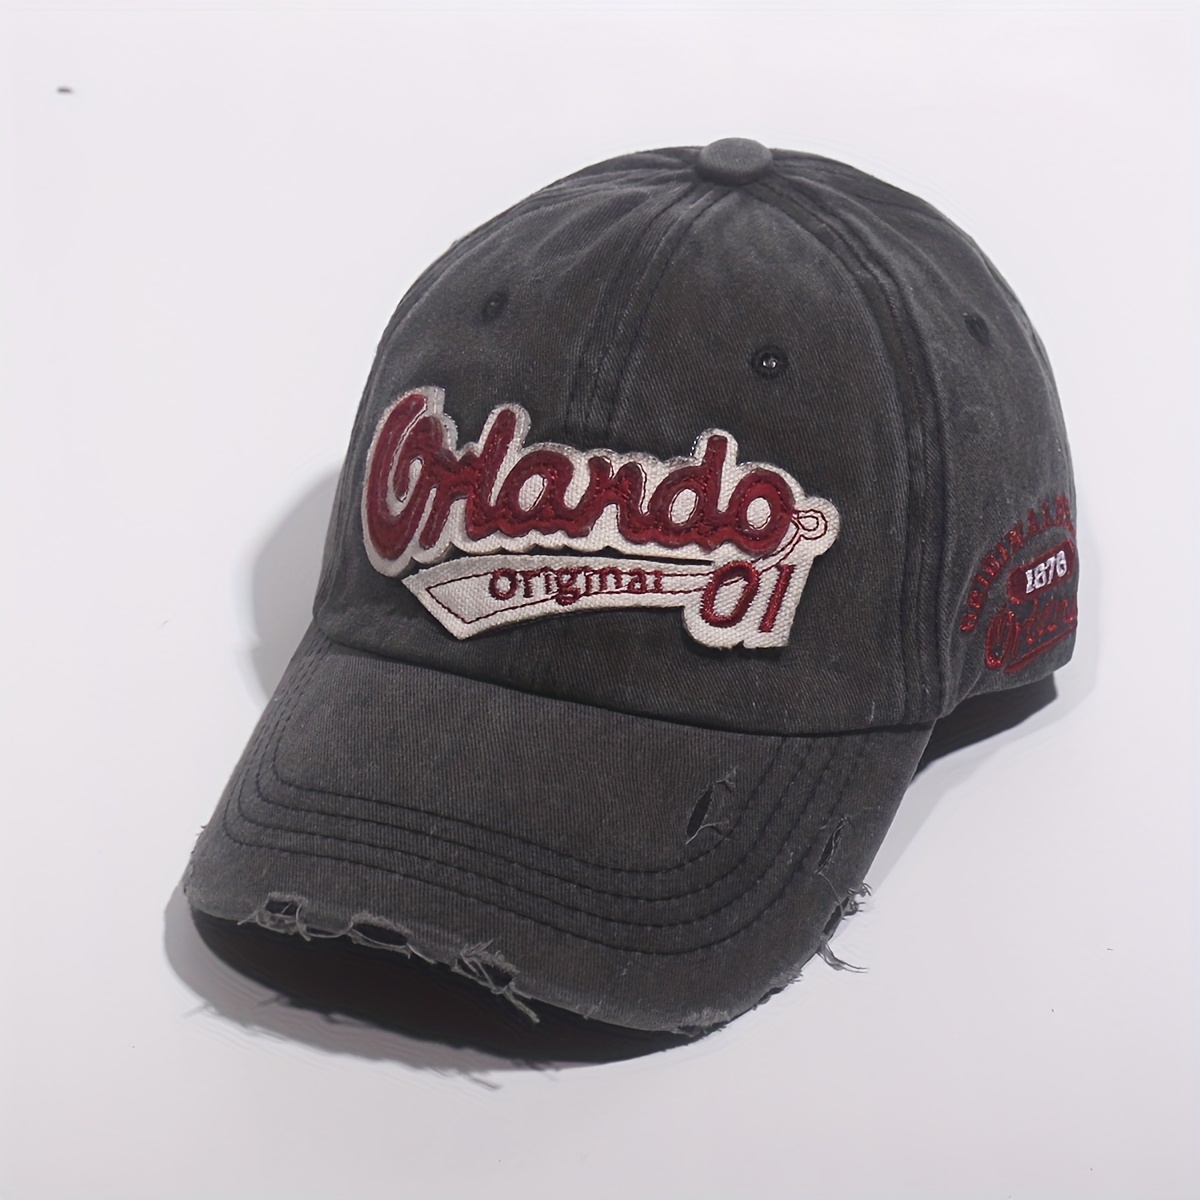 

Men's Washed Cotton Hole Patch Embroidered Baseball Cap